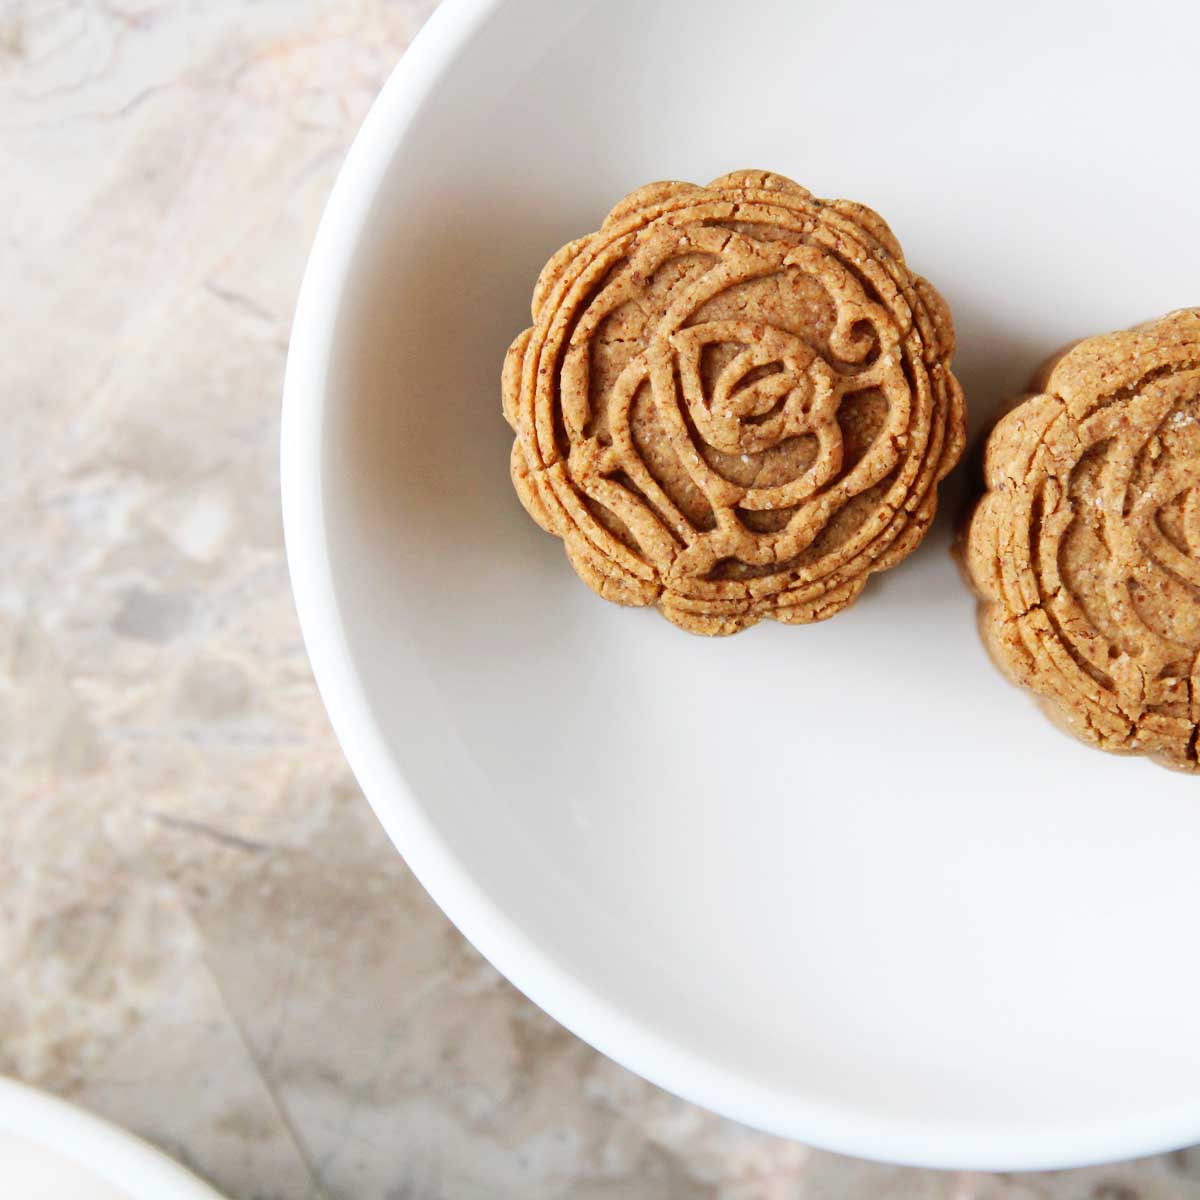 Vegan Peanut Butter Mooncakes with Chocolate Chip Cookie Dough Filling - vegan peanut butter mooncakes